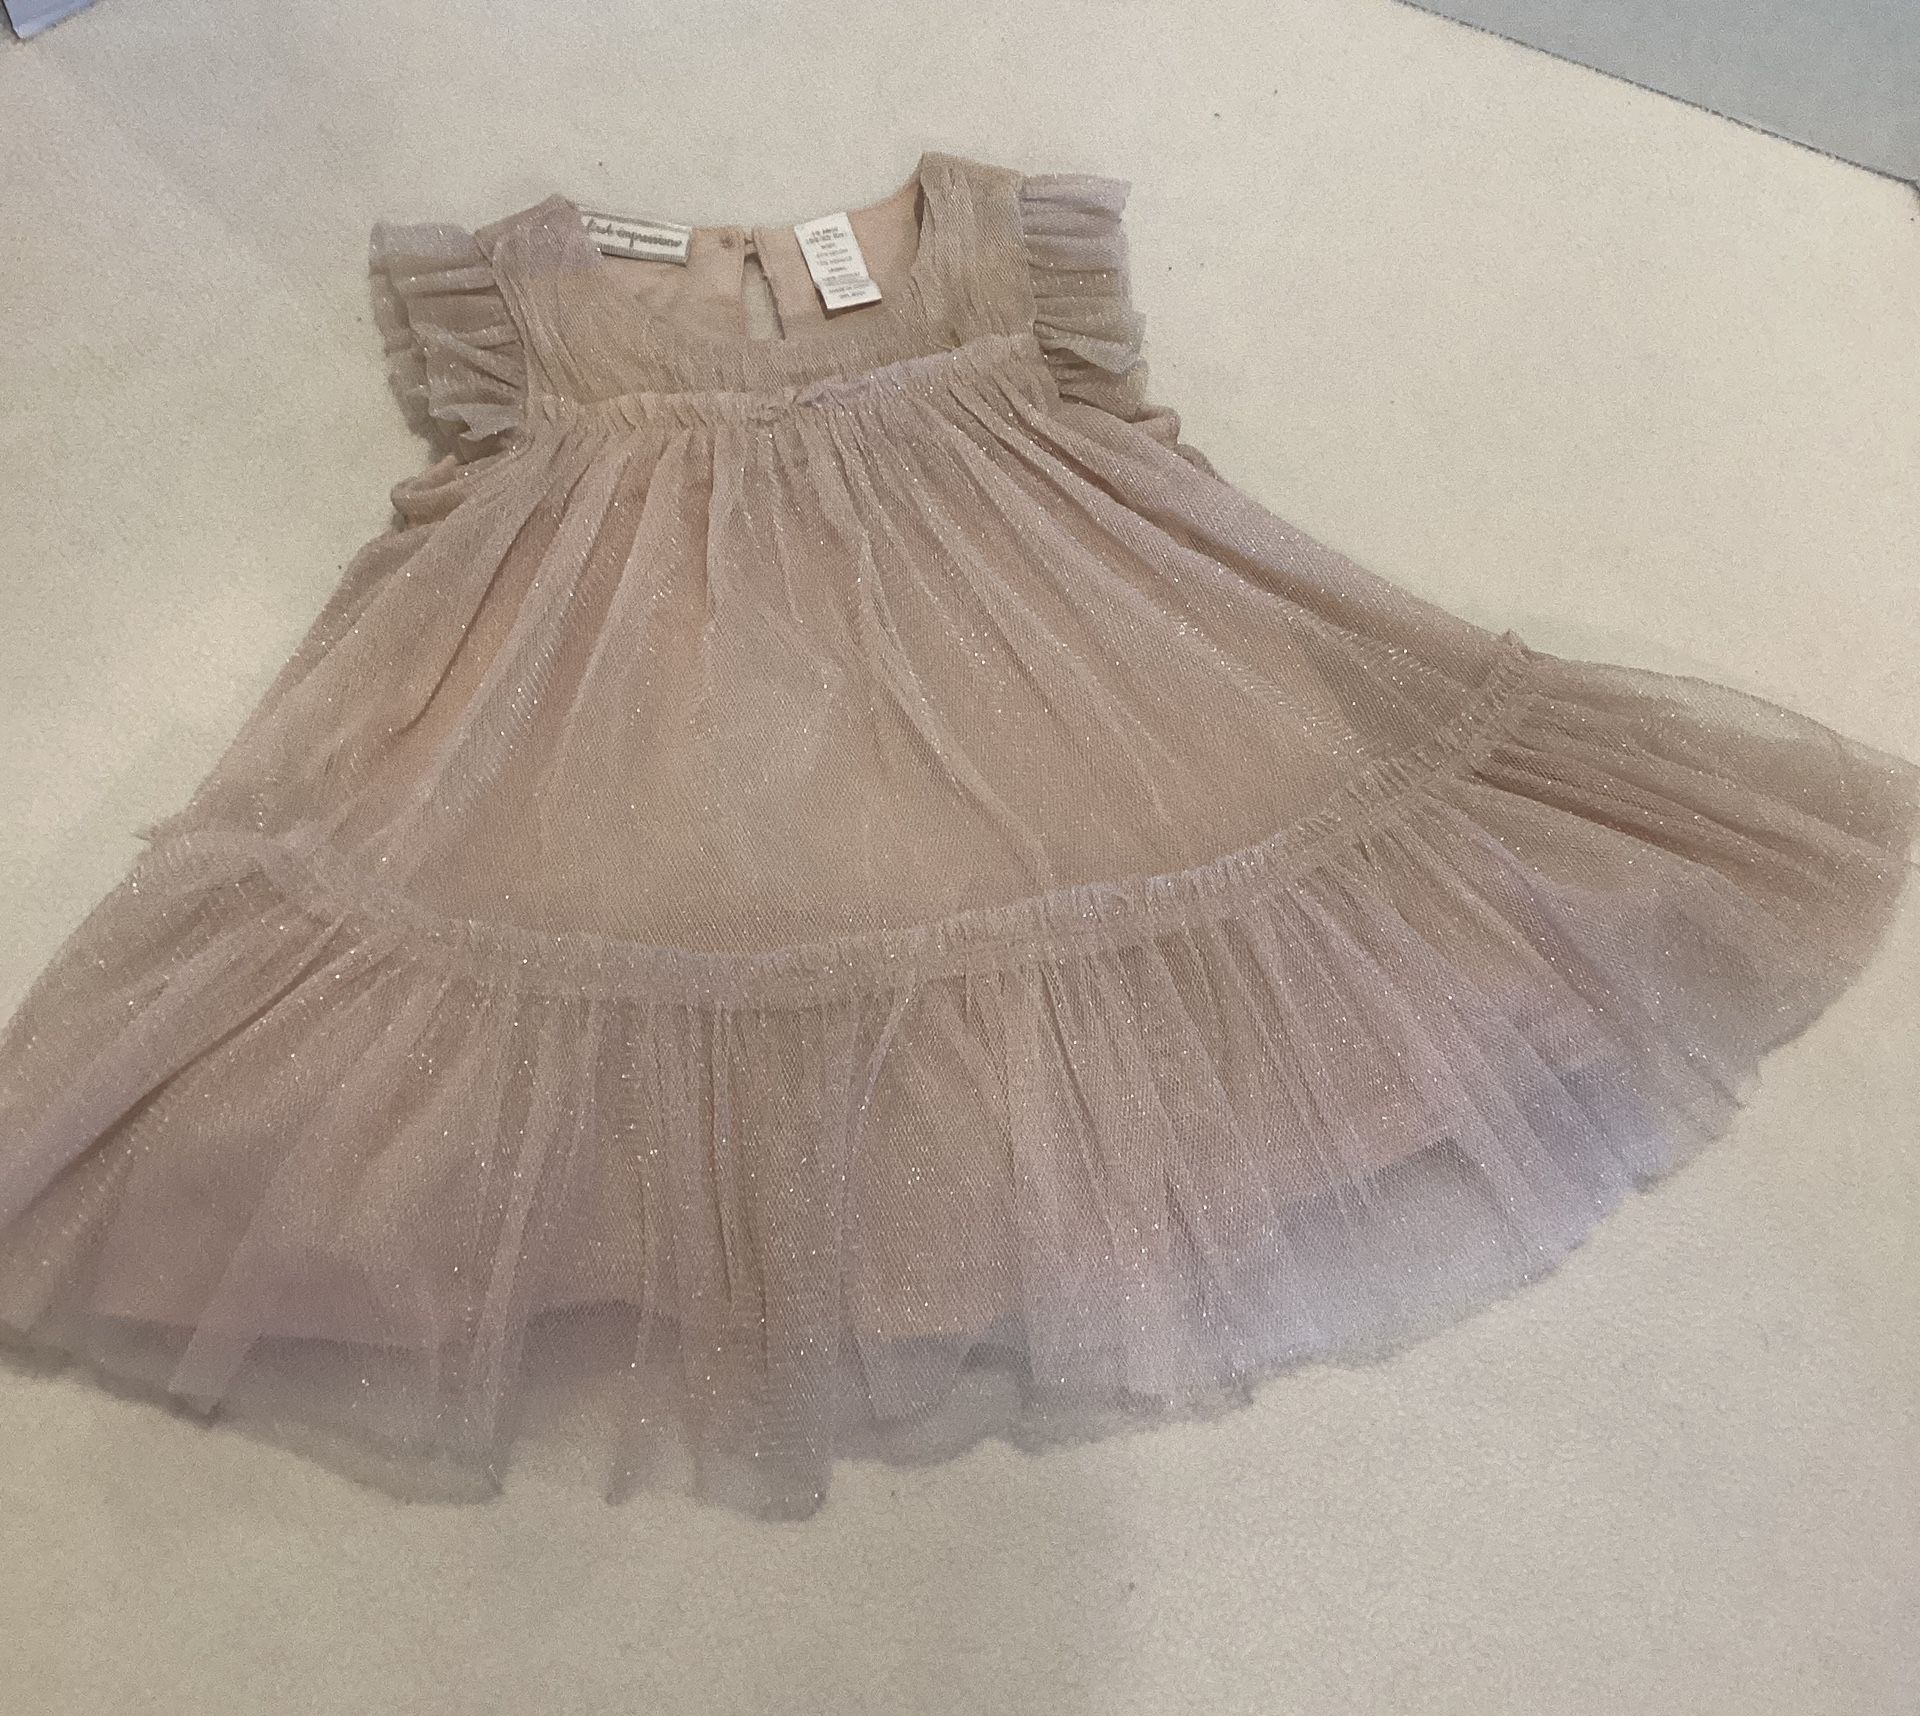 Baby Girls 12 Mo Dress, Fancy Blush Color Tulle With Fully Lining